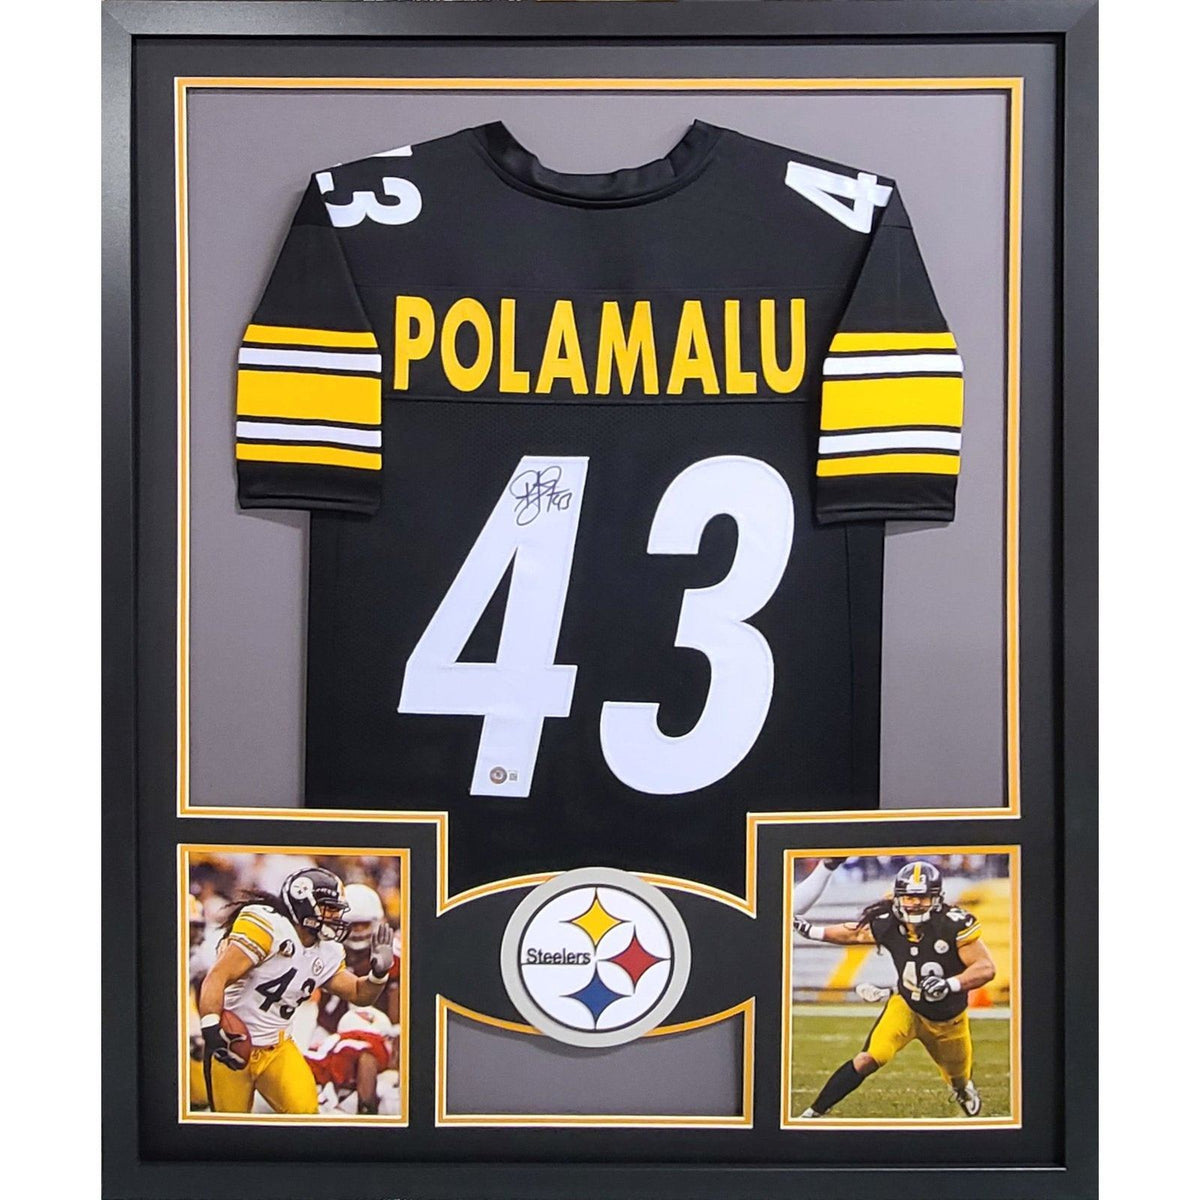 Troy Polamalu Autographed Pittsburgh Steelers Black Jersey Framed